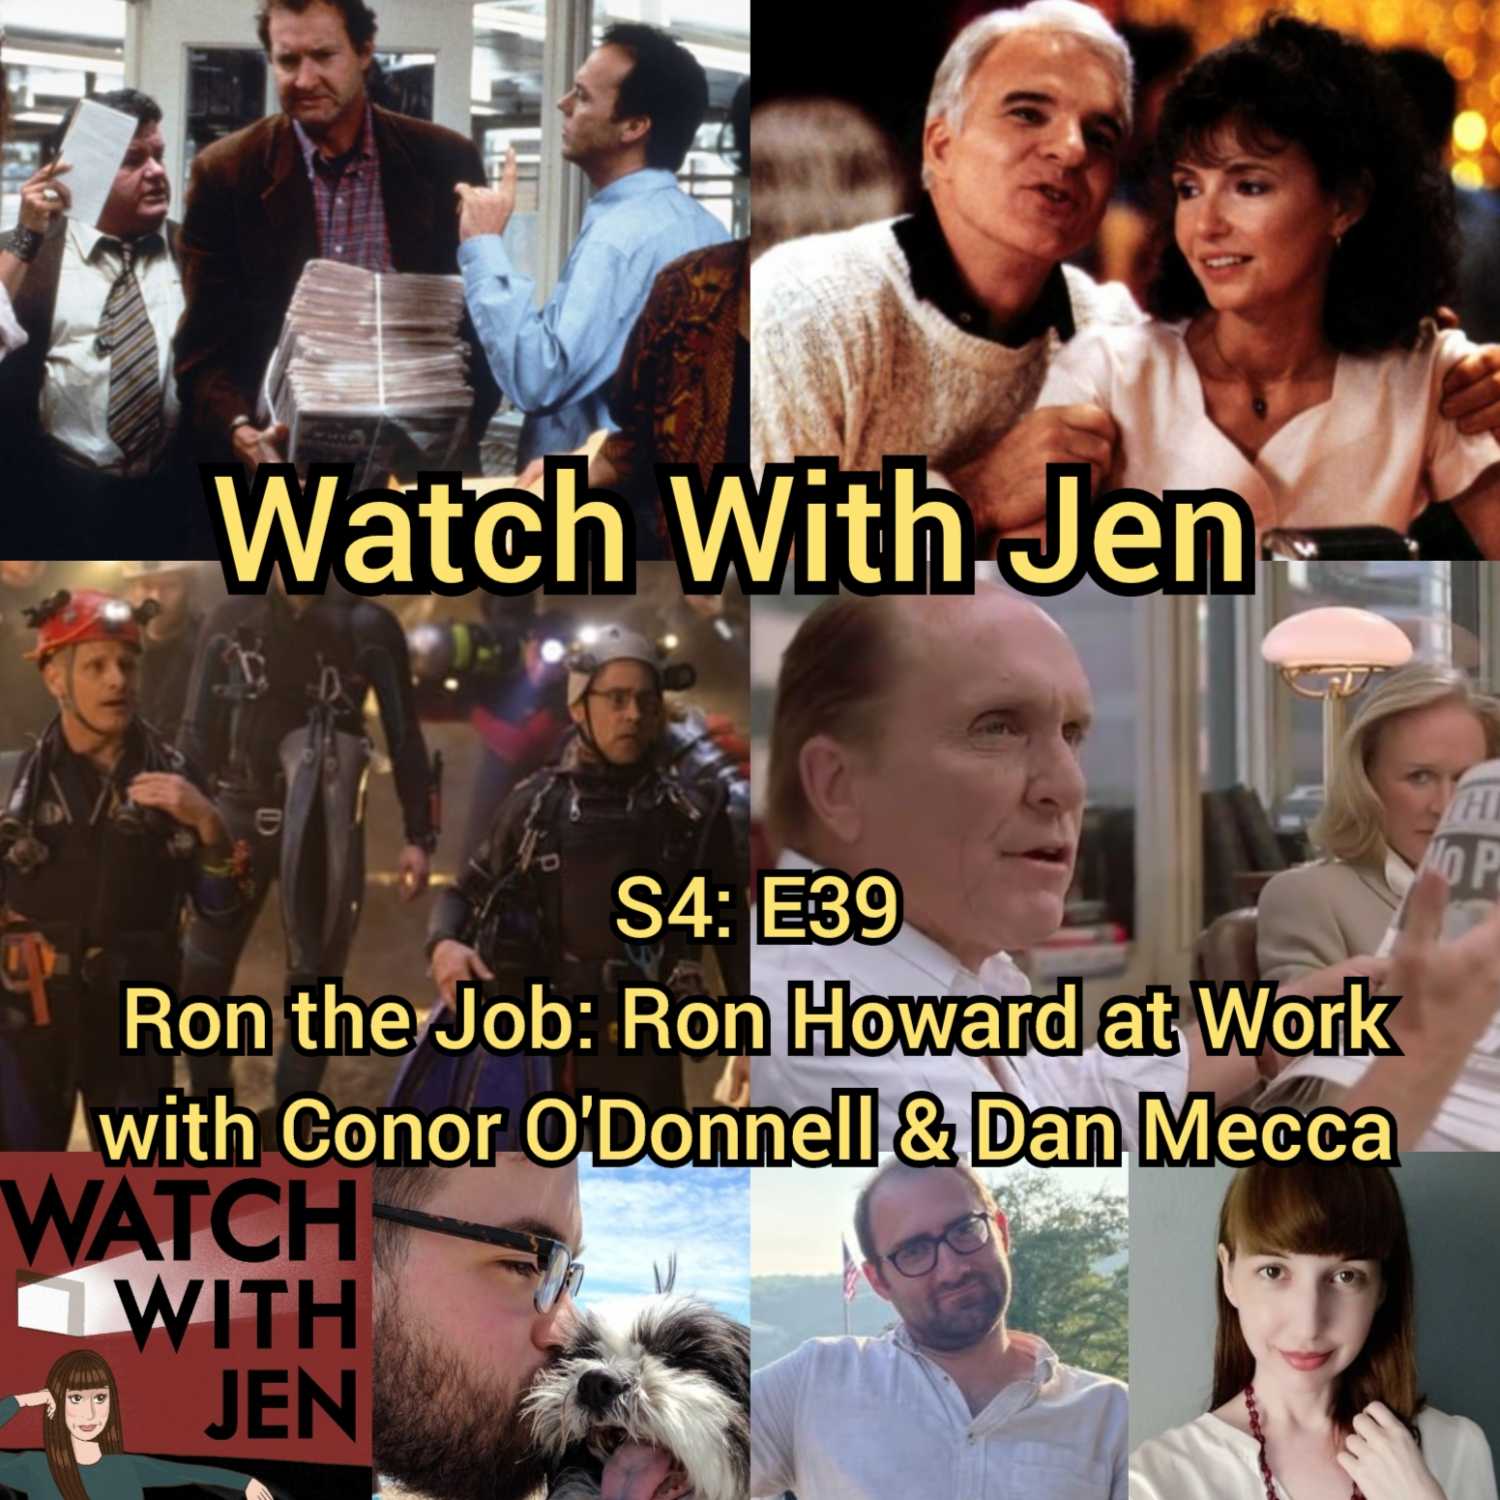 Watch With Jen - S4: E39 - Ron the Job: Ron Howard at Work with Conor O'Donnell & Dan Mecca